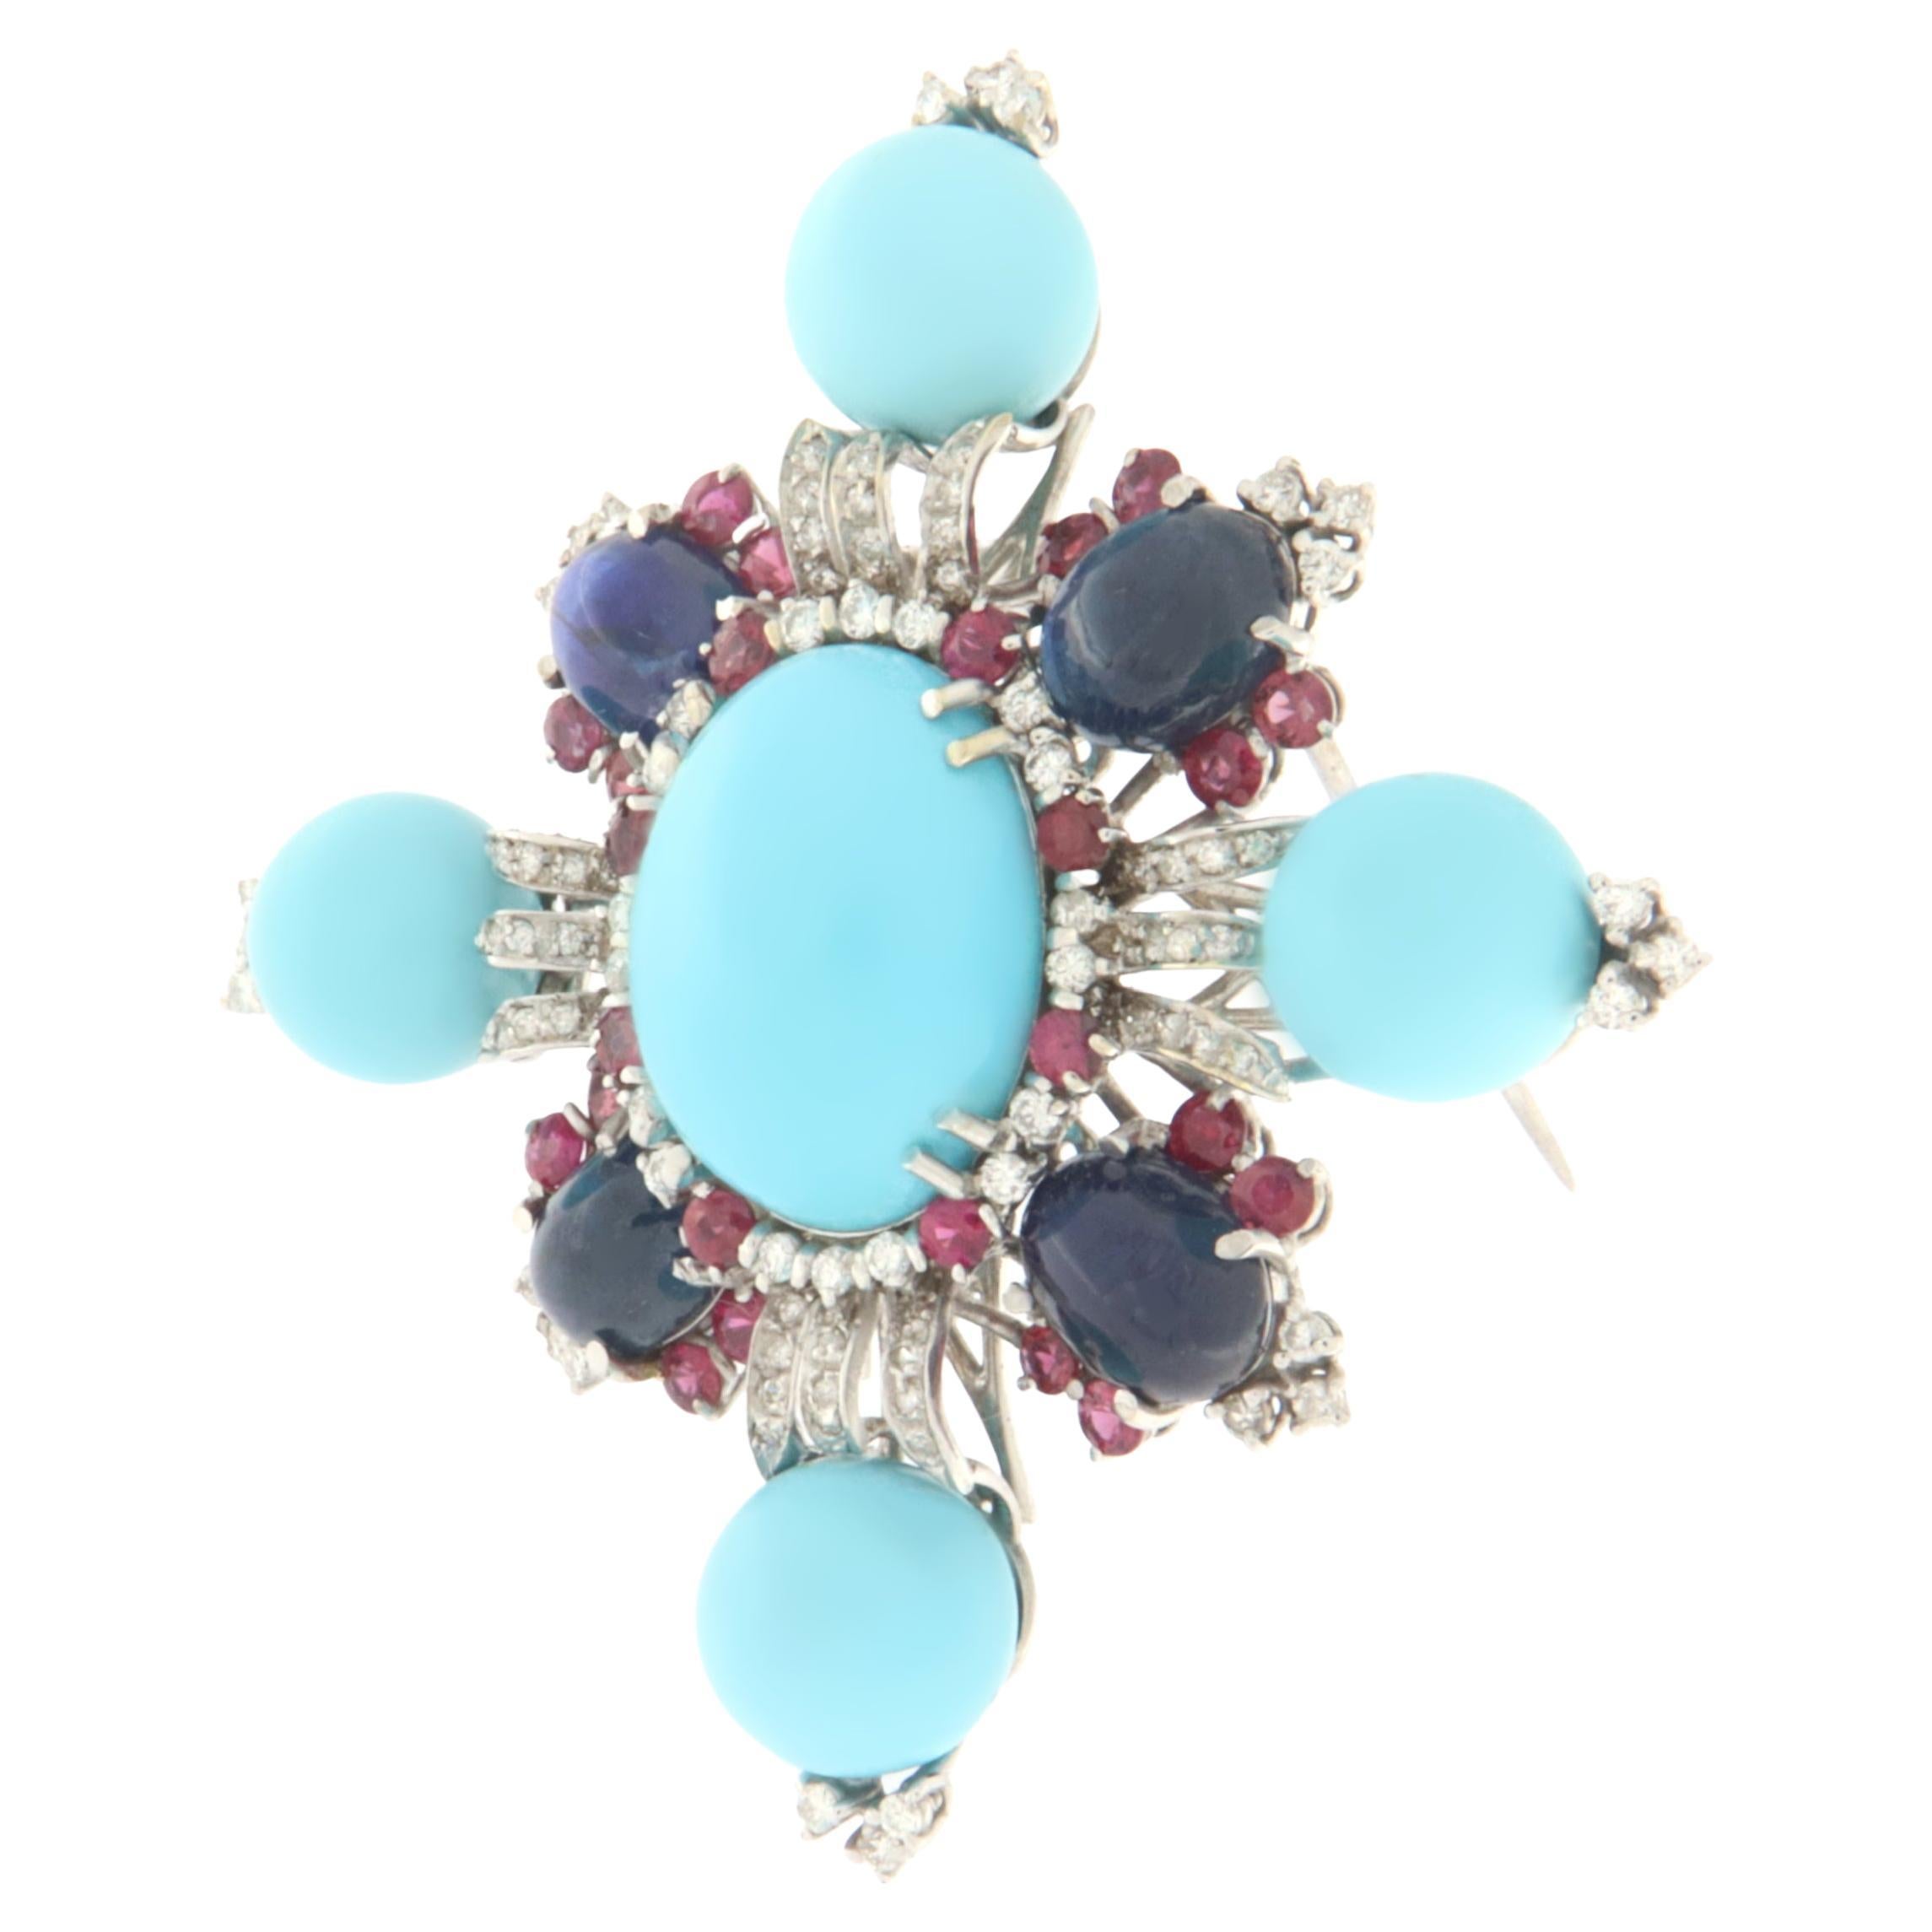 Splendid brooch designed first and then handcrafted by expert artisans in the sector, made of 18-karat white gold and set with natural diamonds, cabochon-shaped sapphires, rubies and turquoise spheres with an oval in the center also of natural